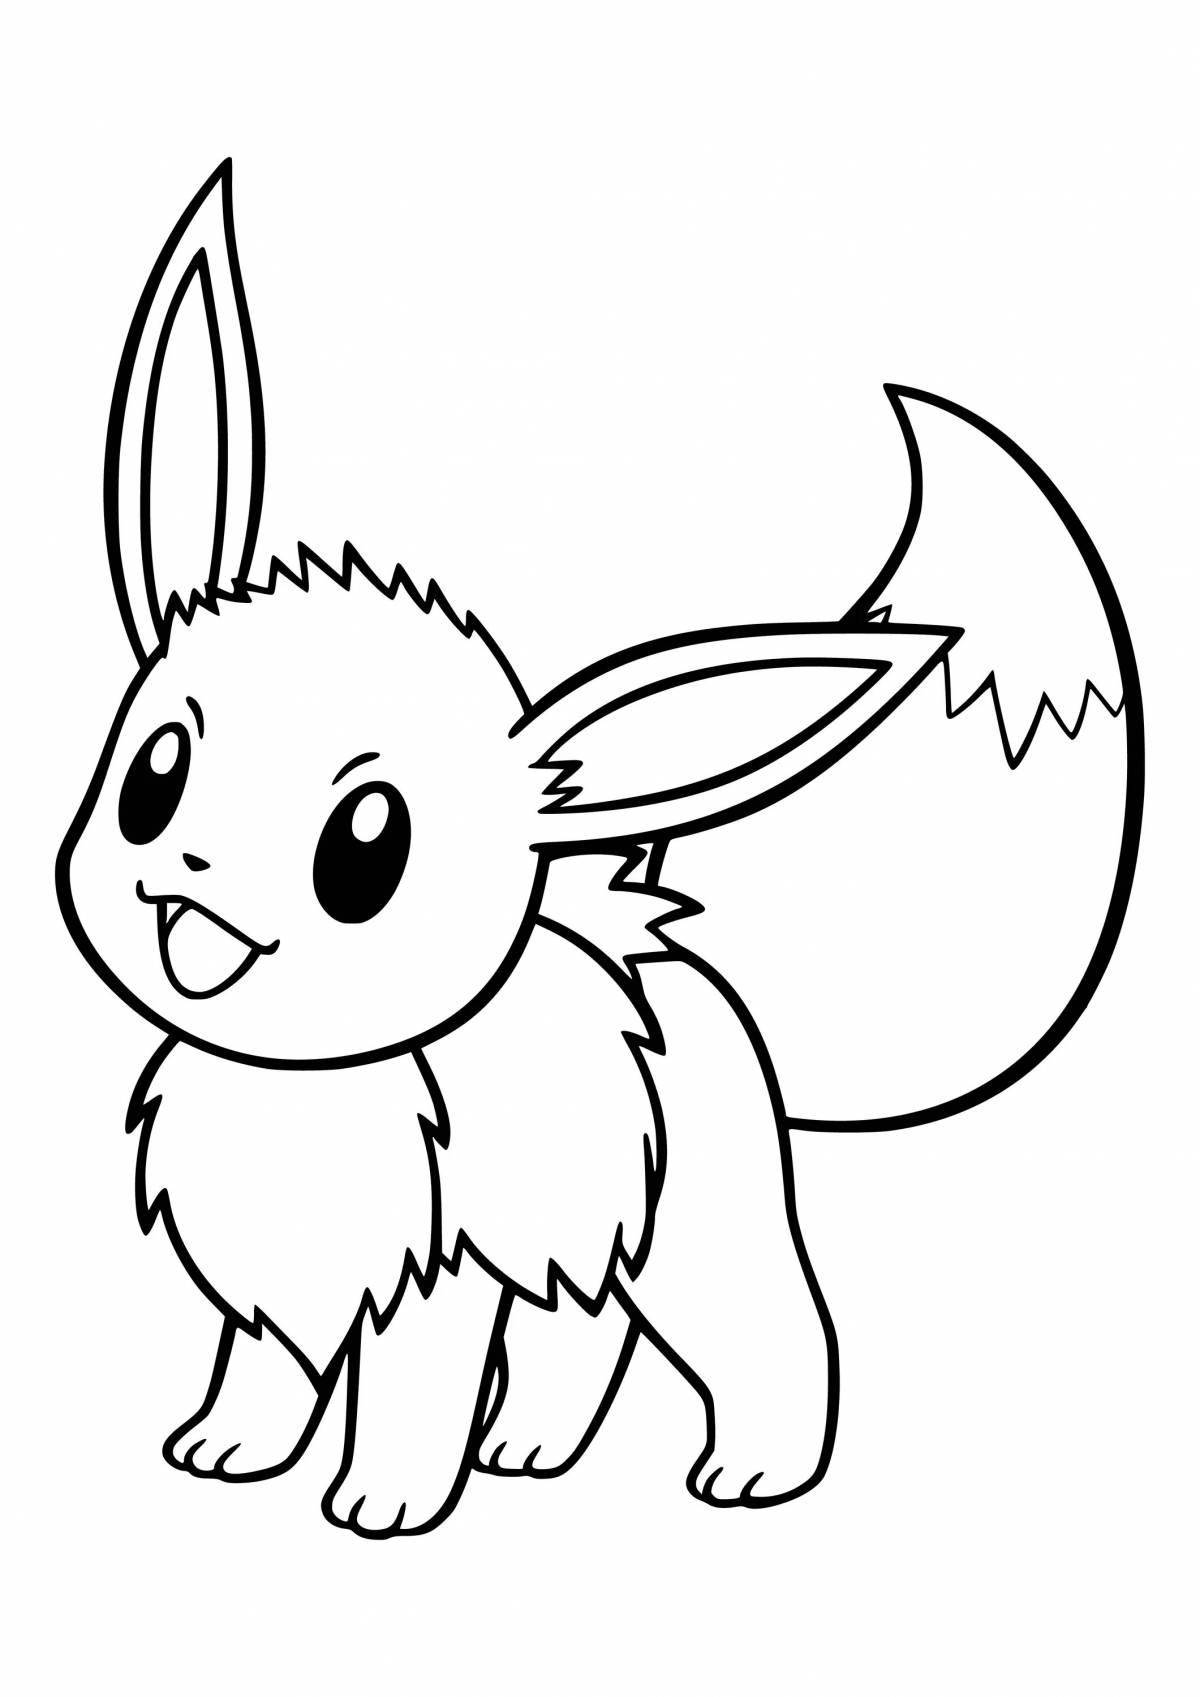 Adorable pokemon coloring book for kids